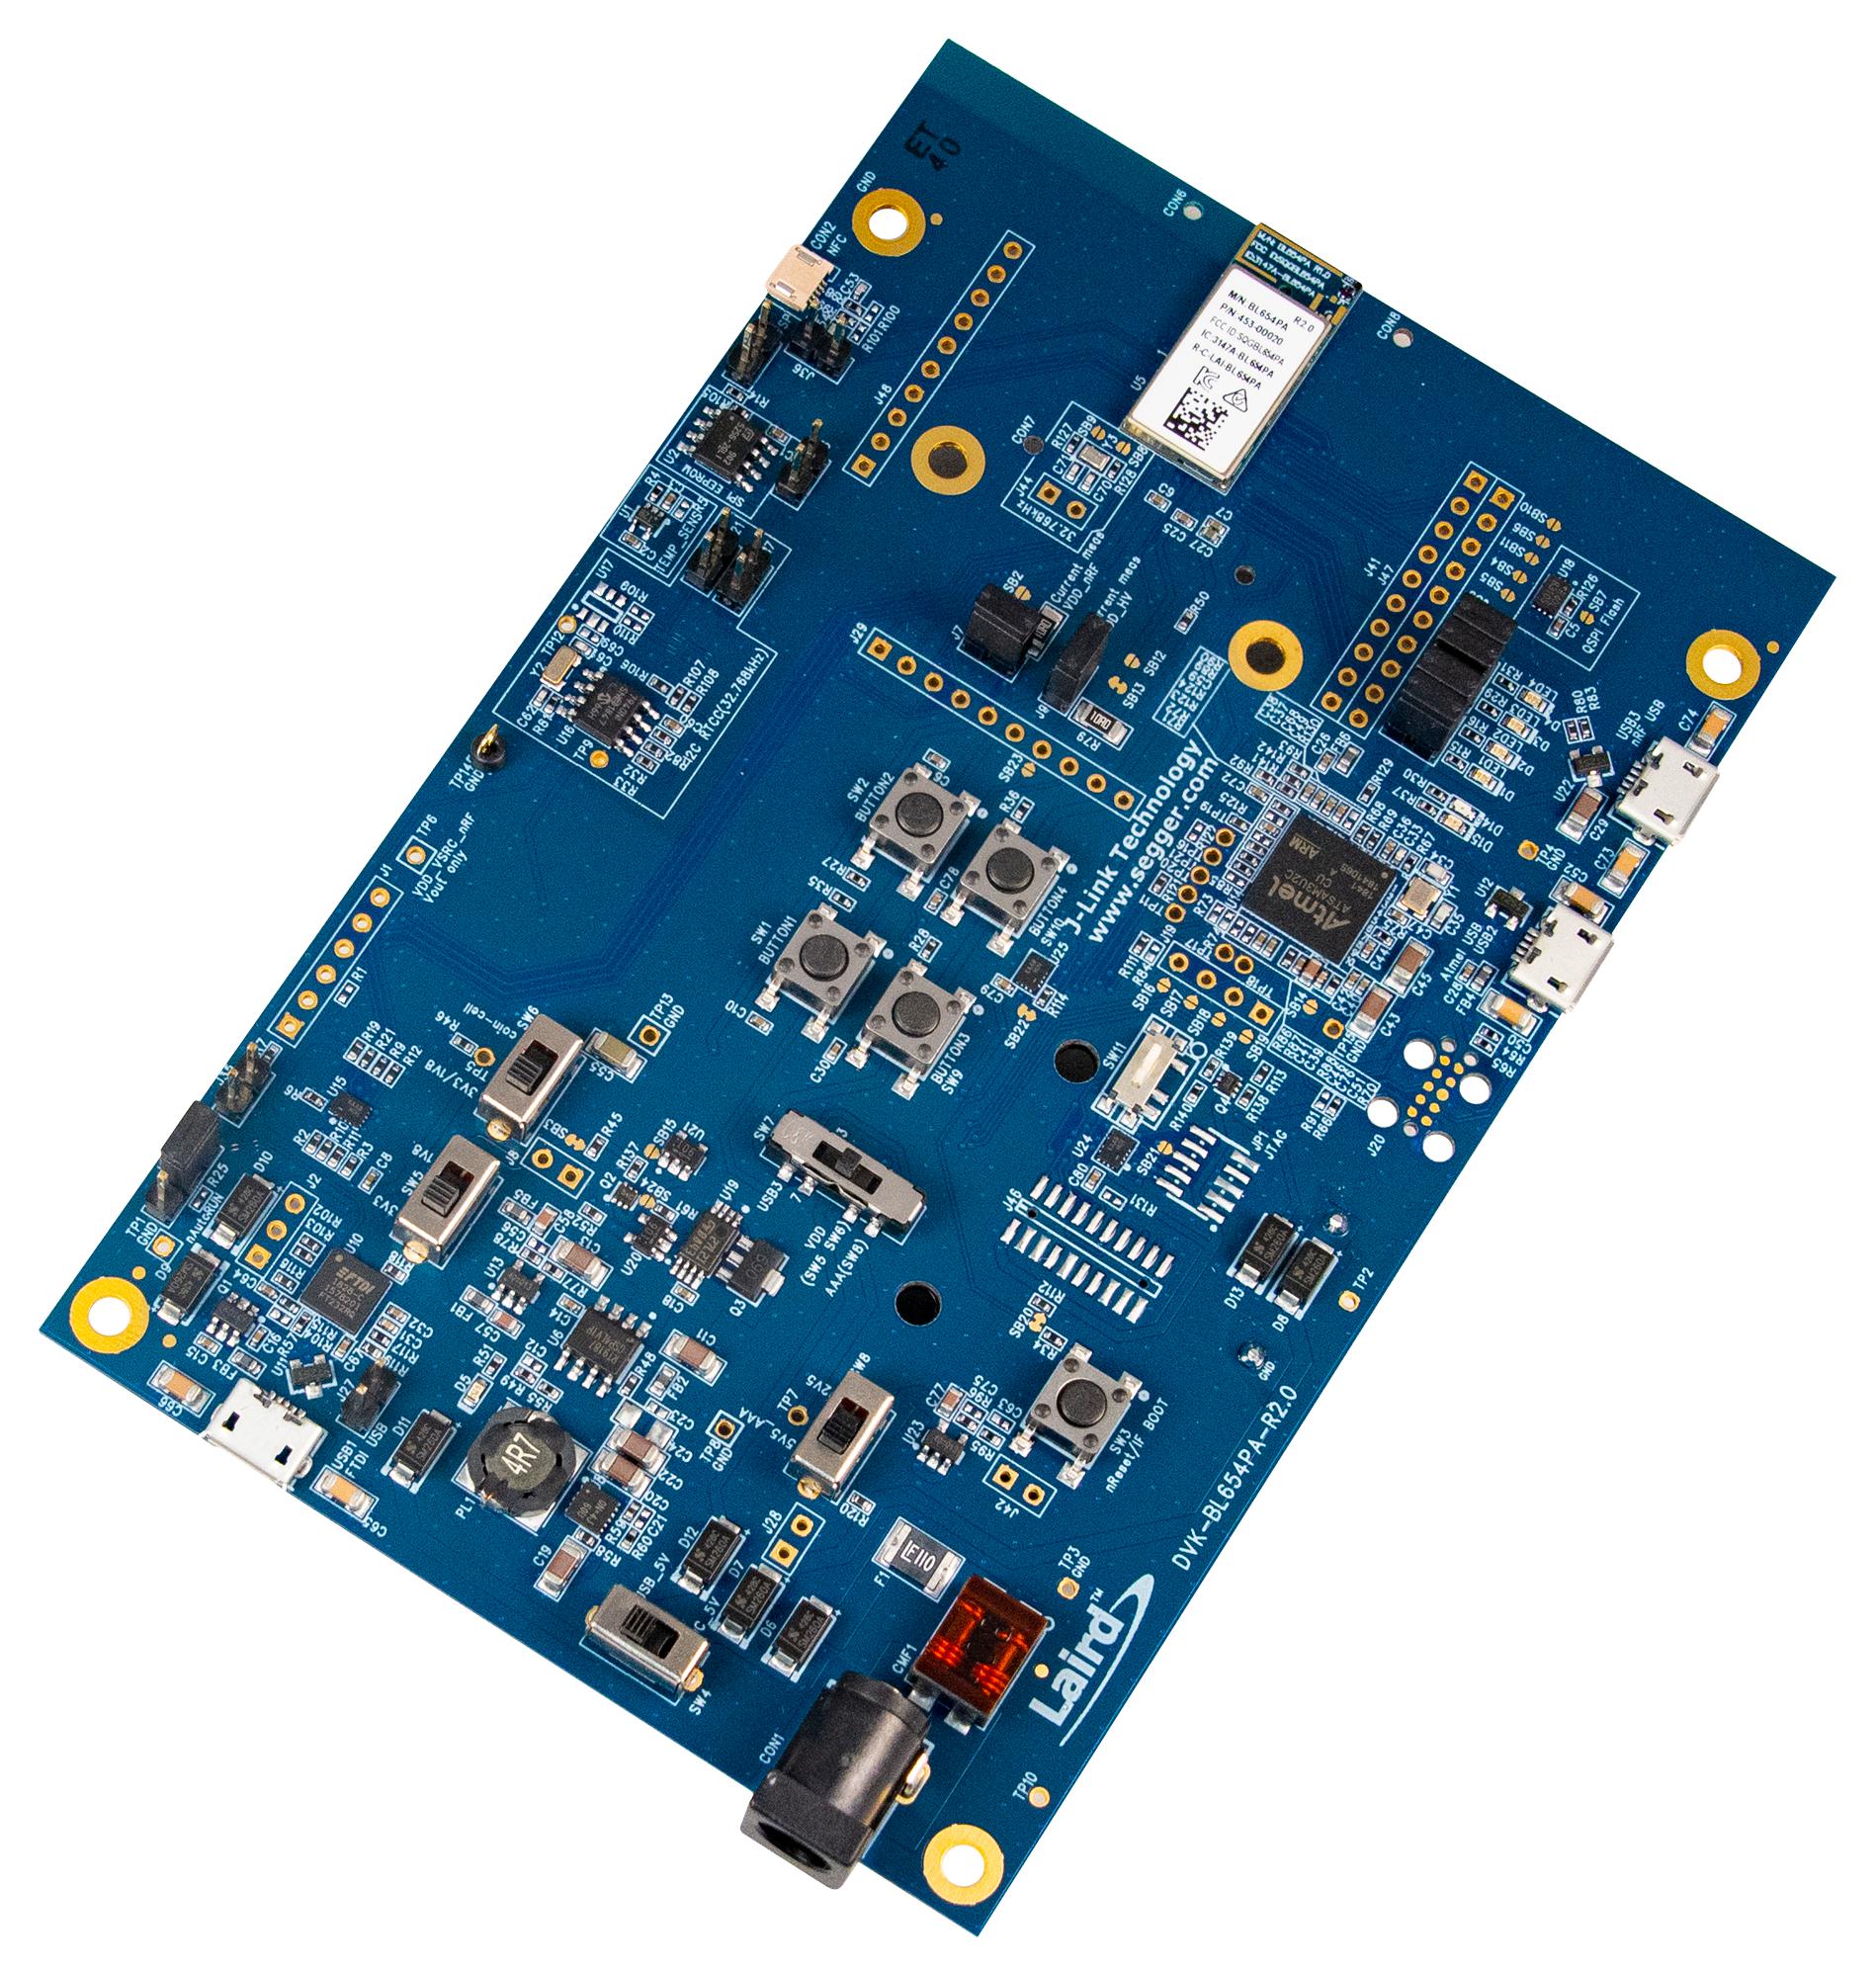 455-00022 DEV KIT, BLUETOOTH LOW ENERGY/NFC LAIRD CONNECTIVITY